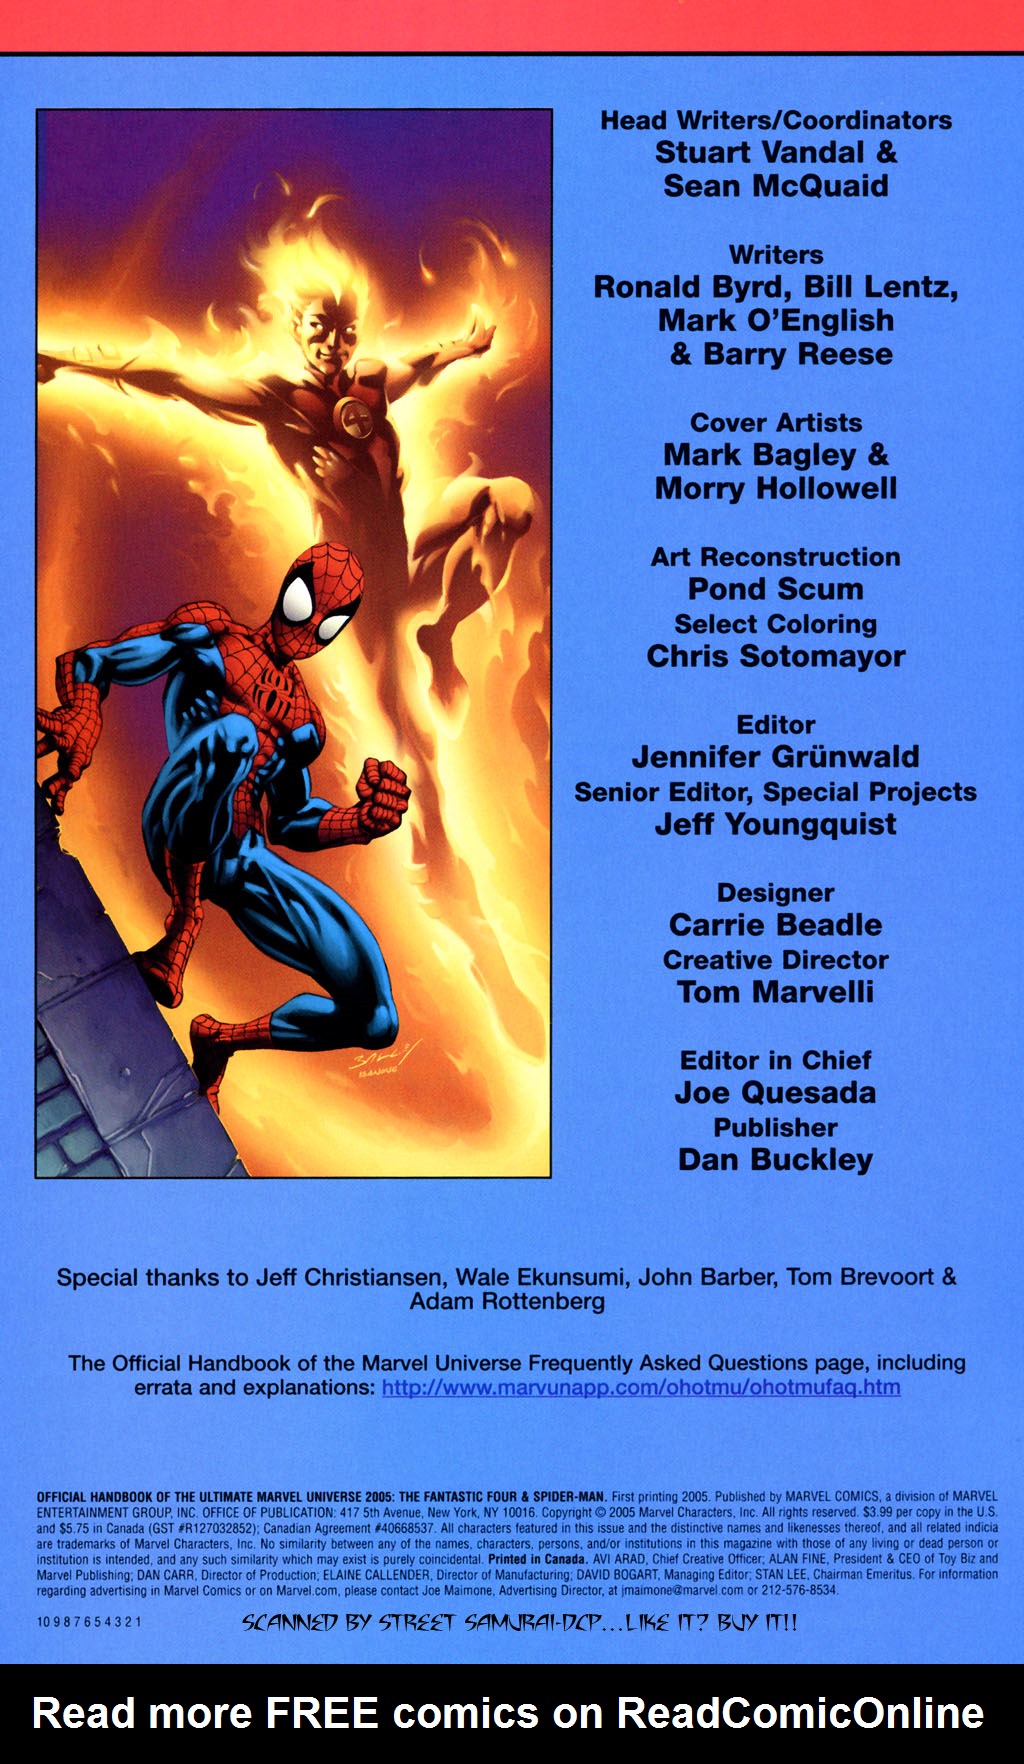 Read online Official Handbook of the Ultimate Marvel Universe 2005: The Fantastic Four & Spider-Man comic -  Issue # Full - 2